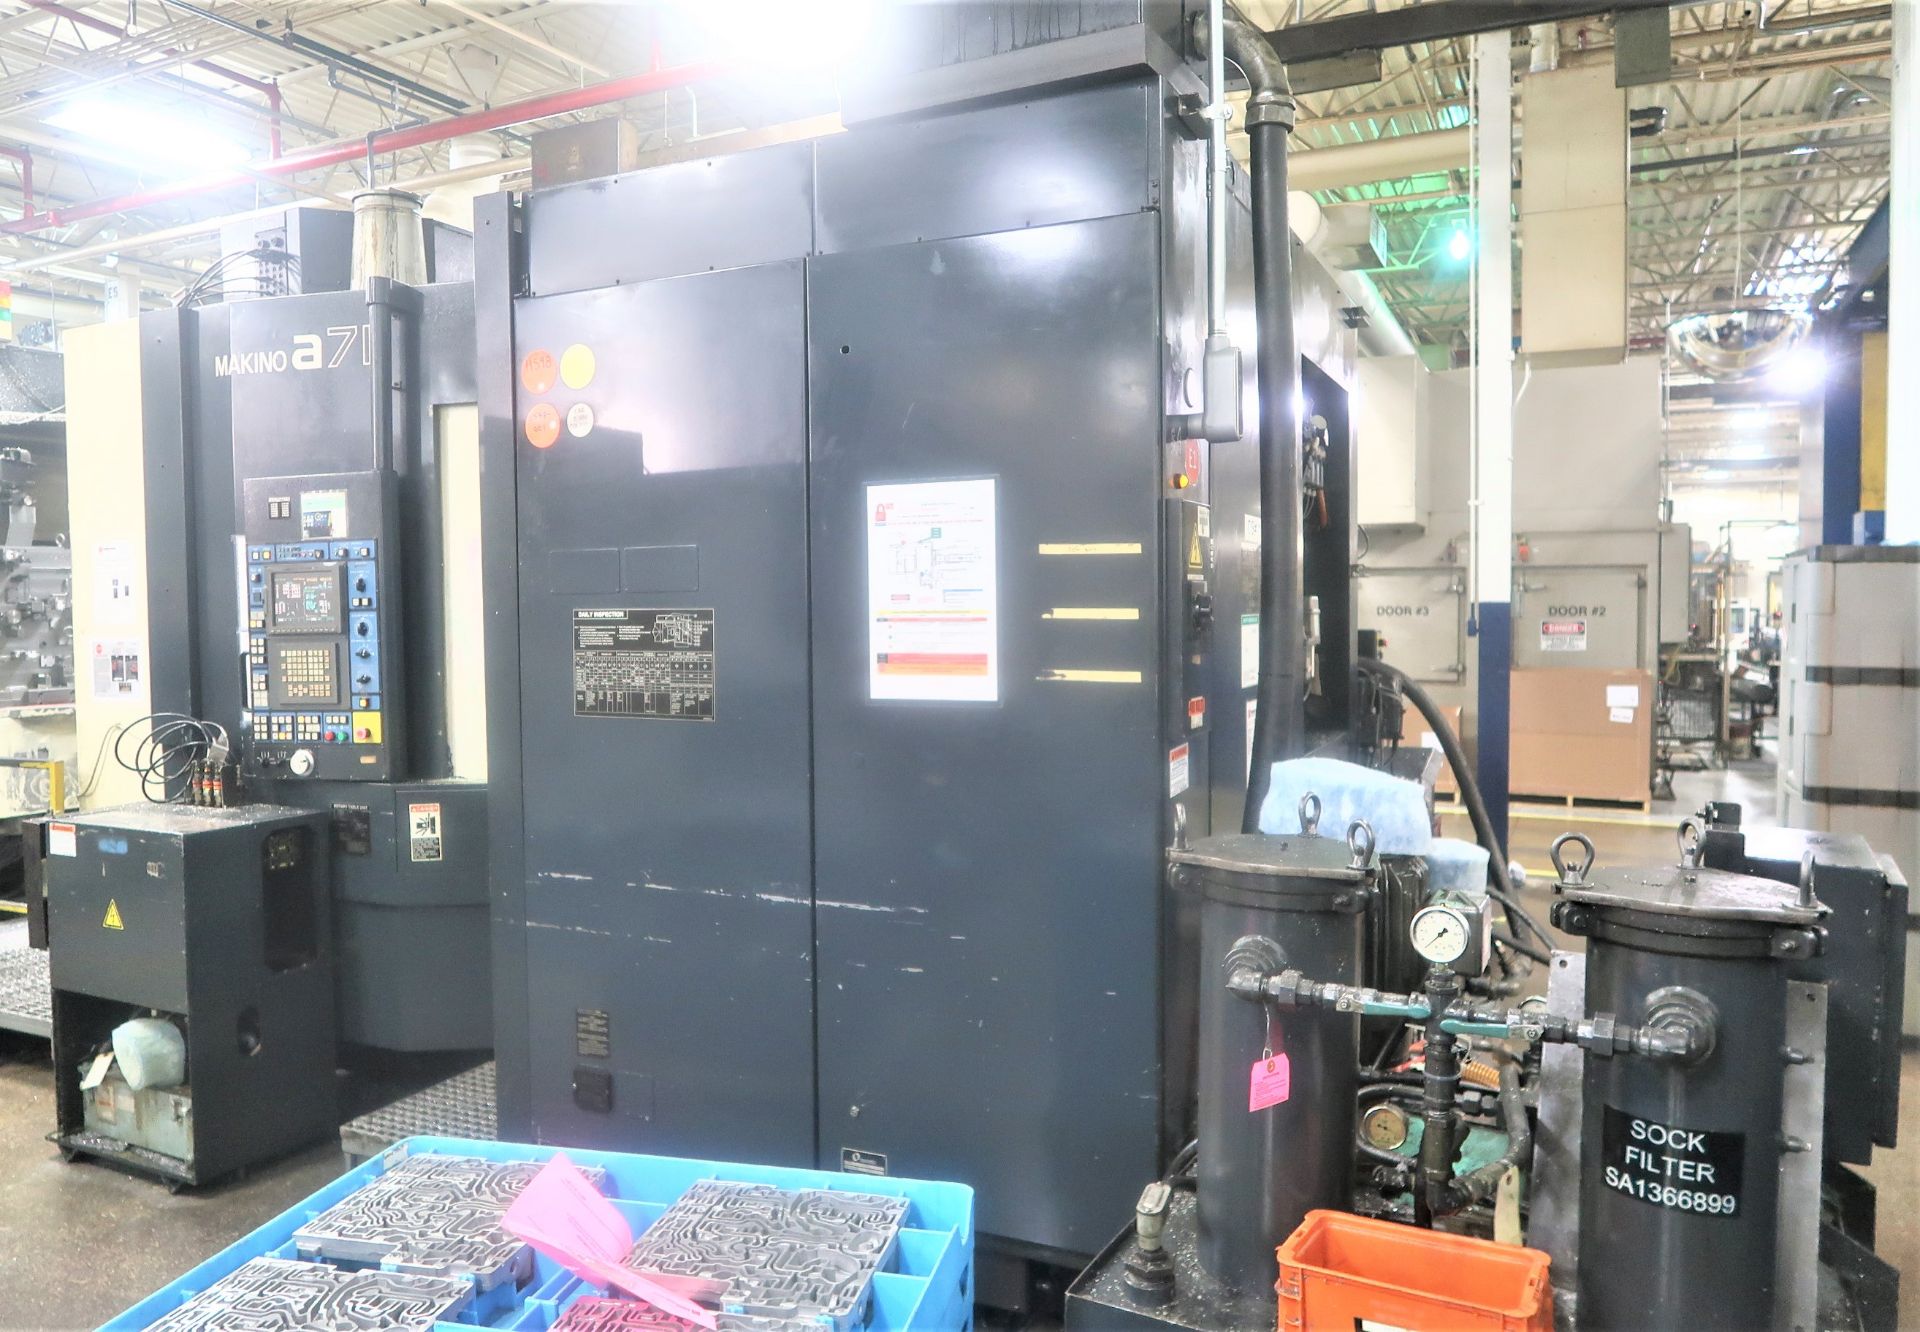 20"x20" Pallet Makino A71 CNC 4-Axis Precision Horizontal Machining Center, New 2004 - Image 6 of 9